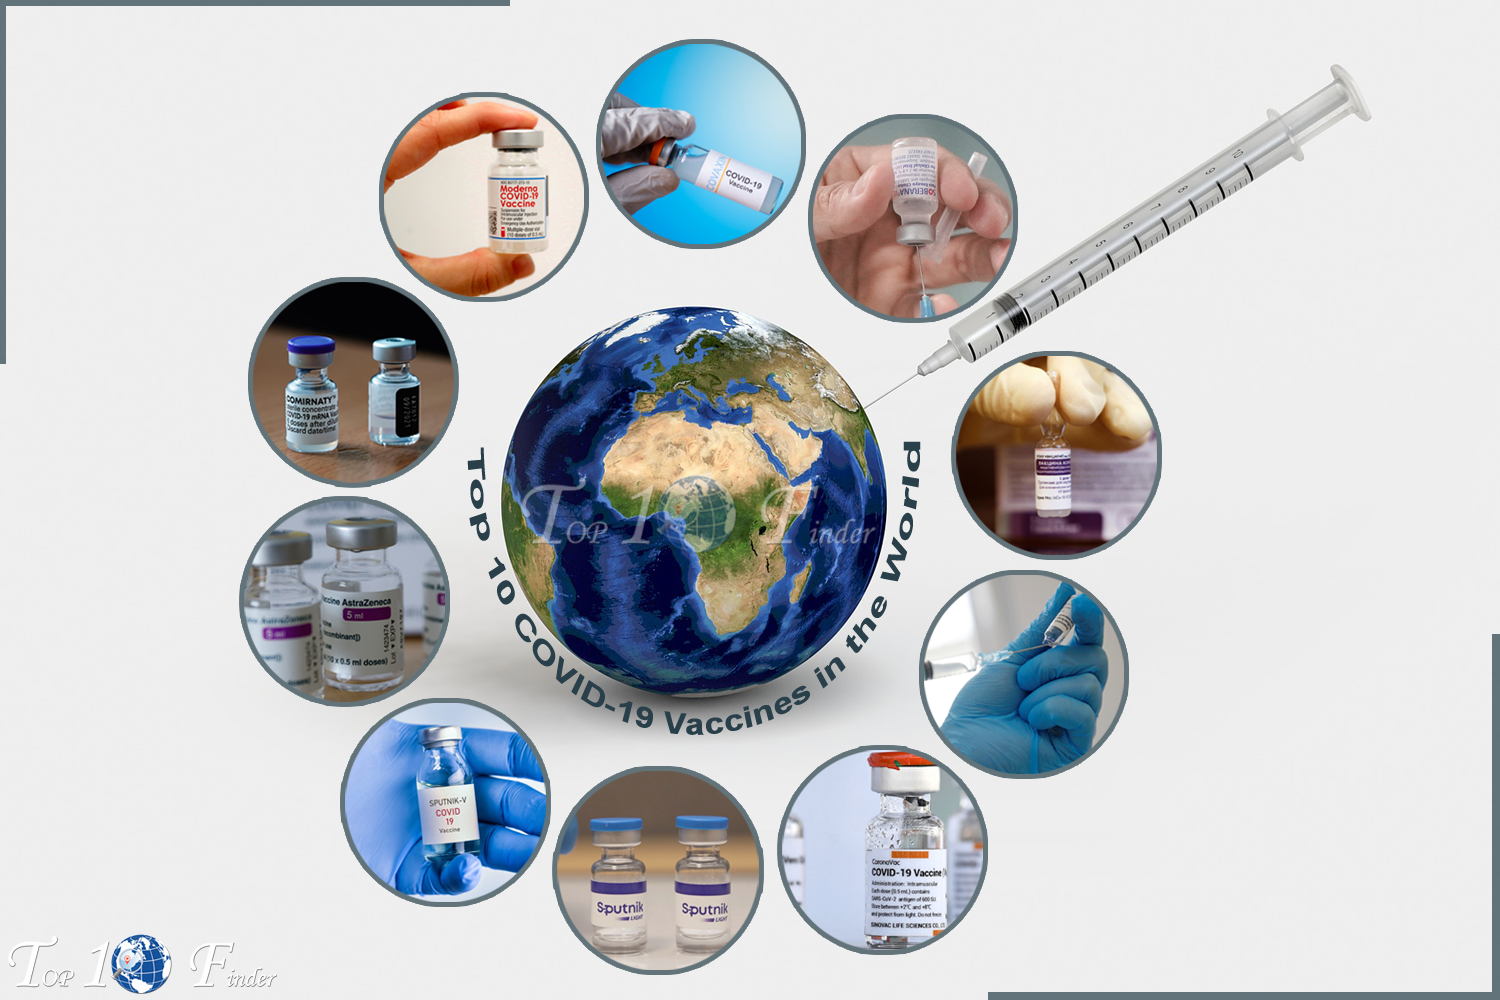 Top 10 COVID-19 Vaccines in the World